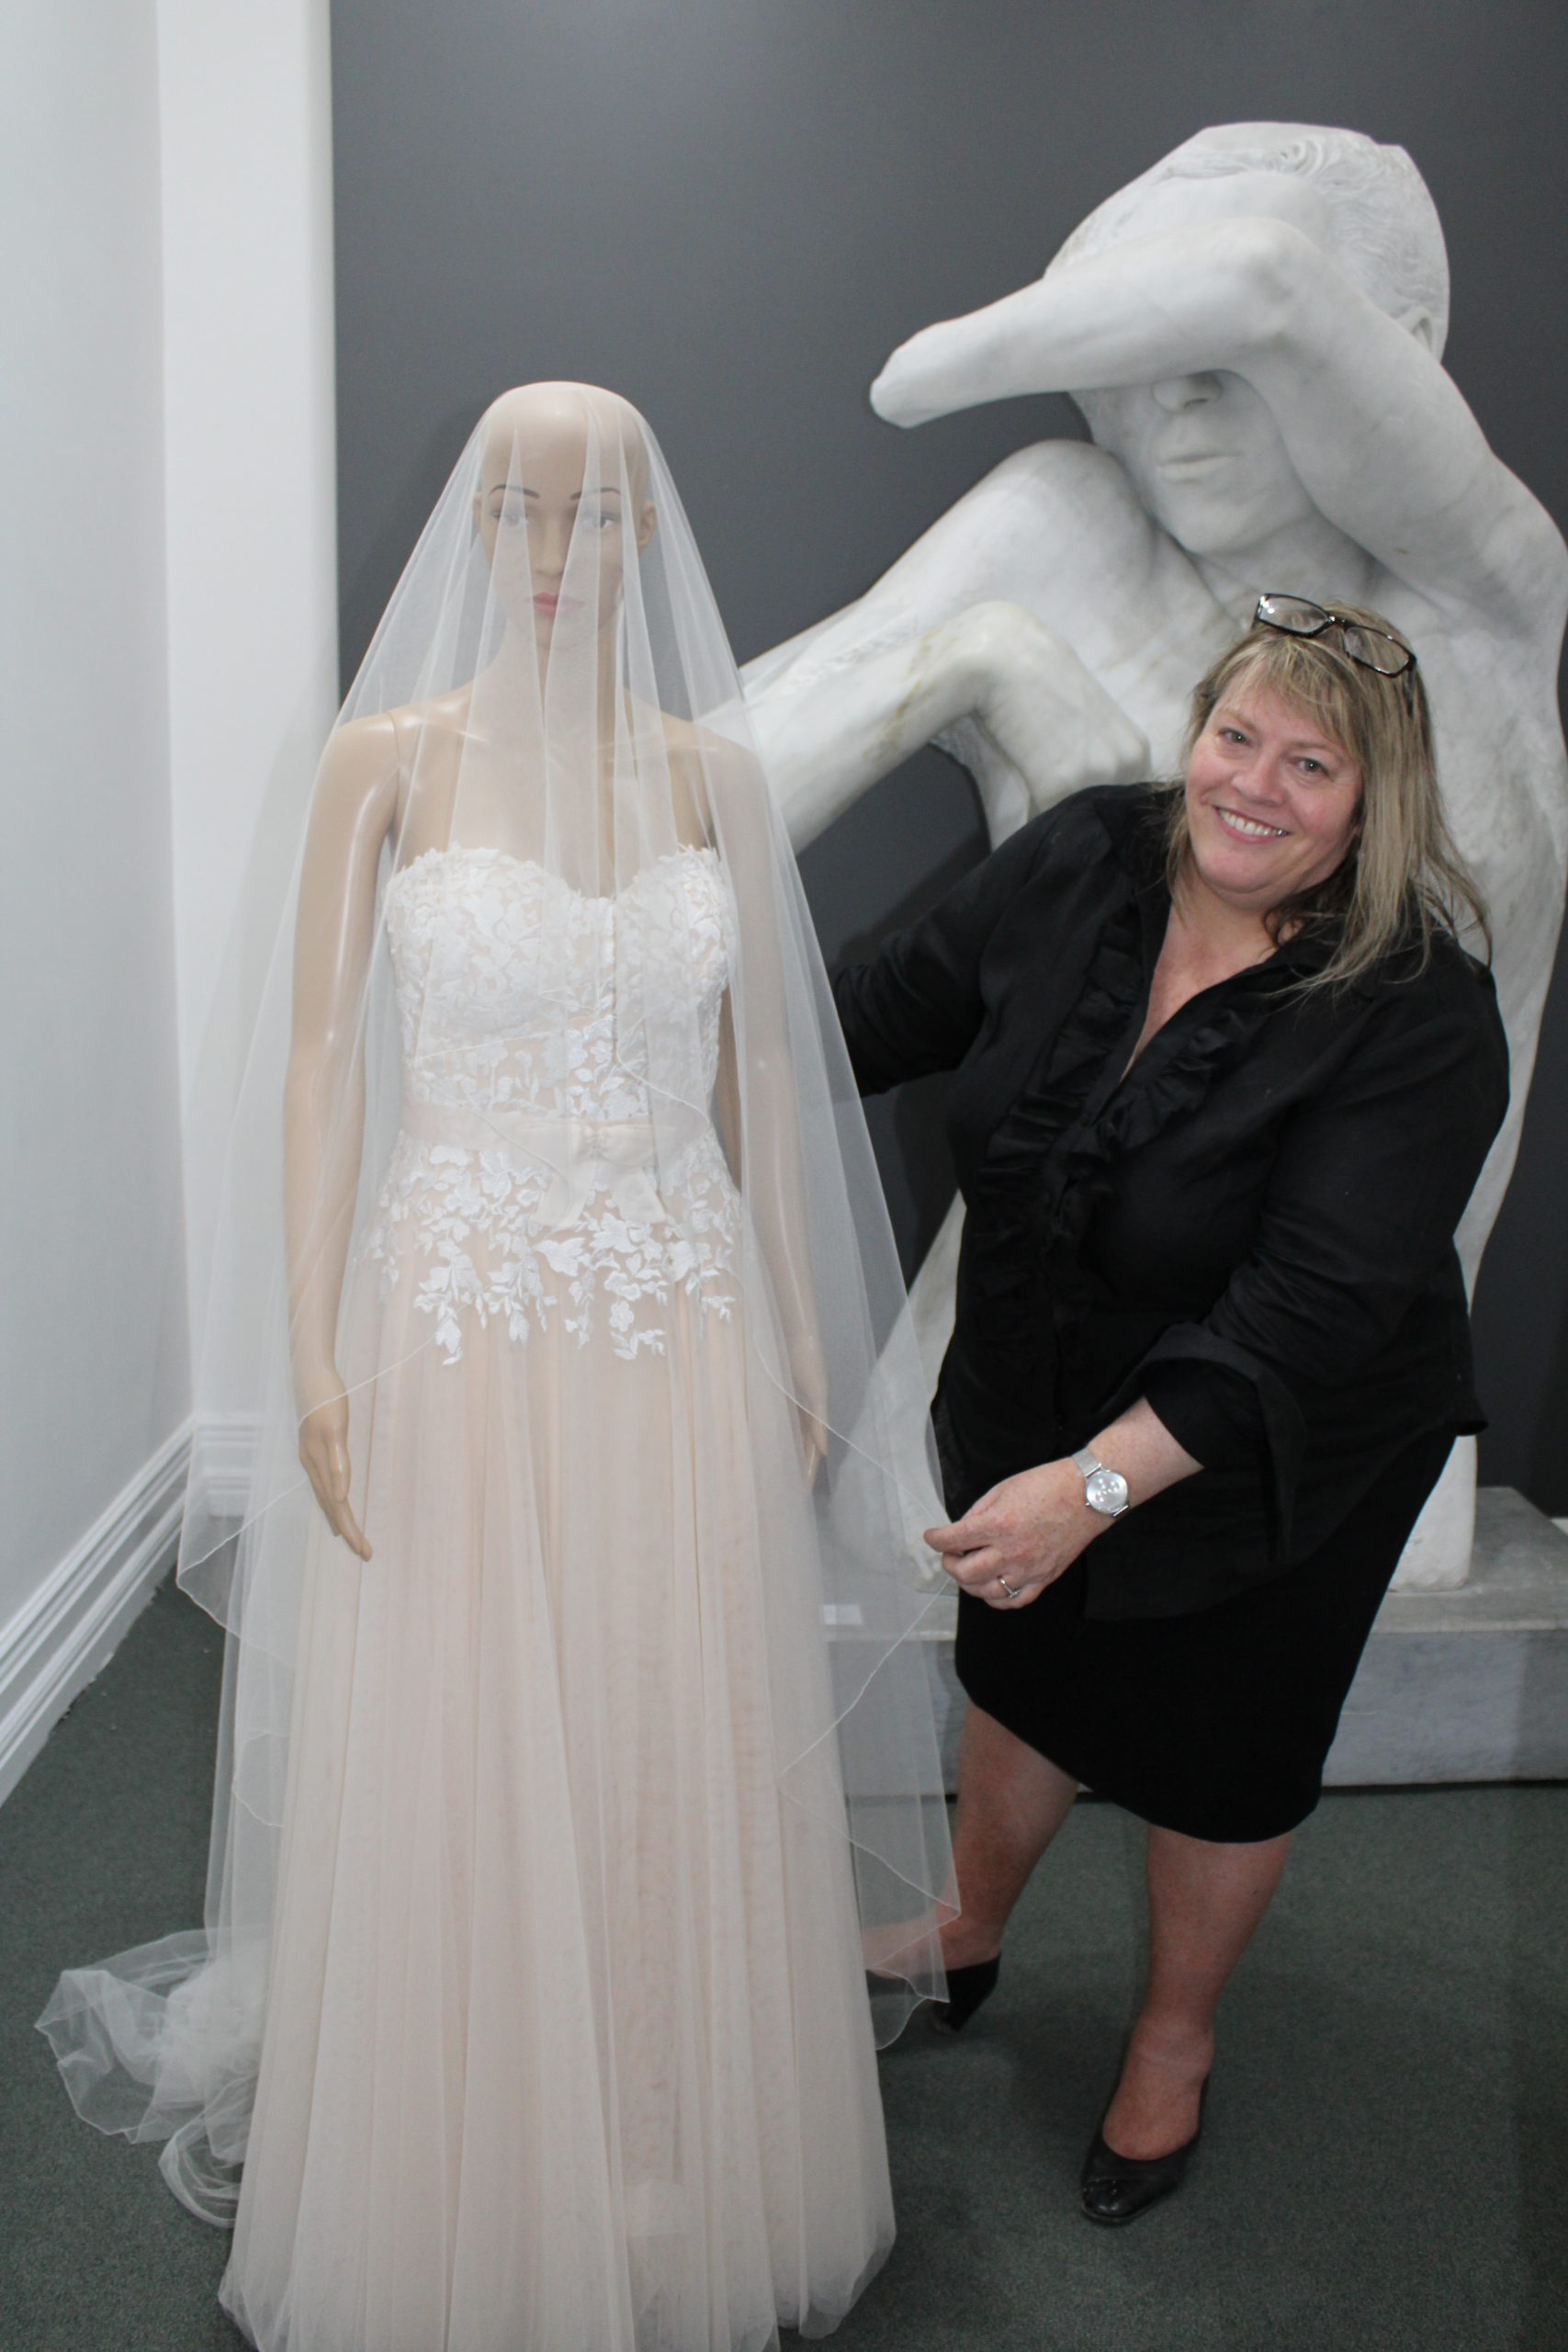 Spectacular wedding gown seamstress in spotlight | GALLERY